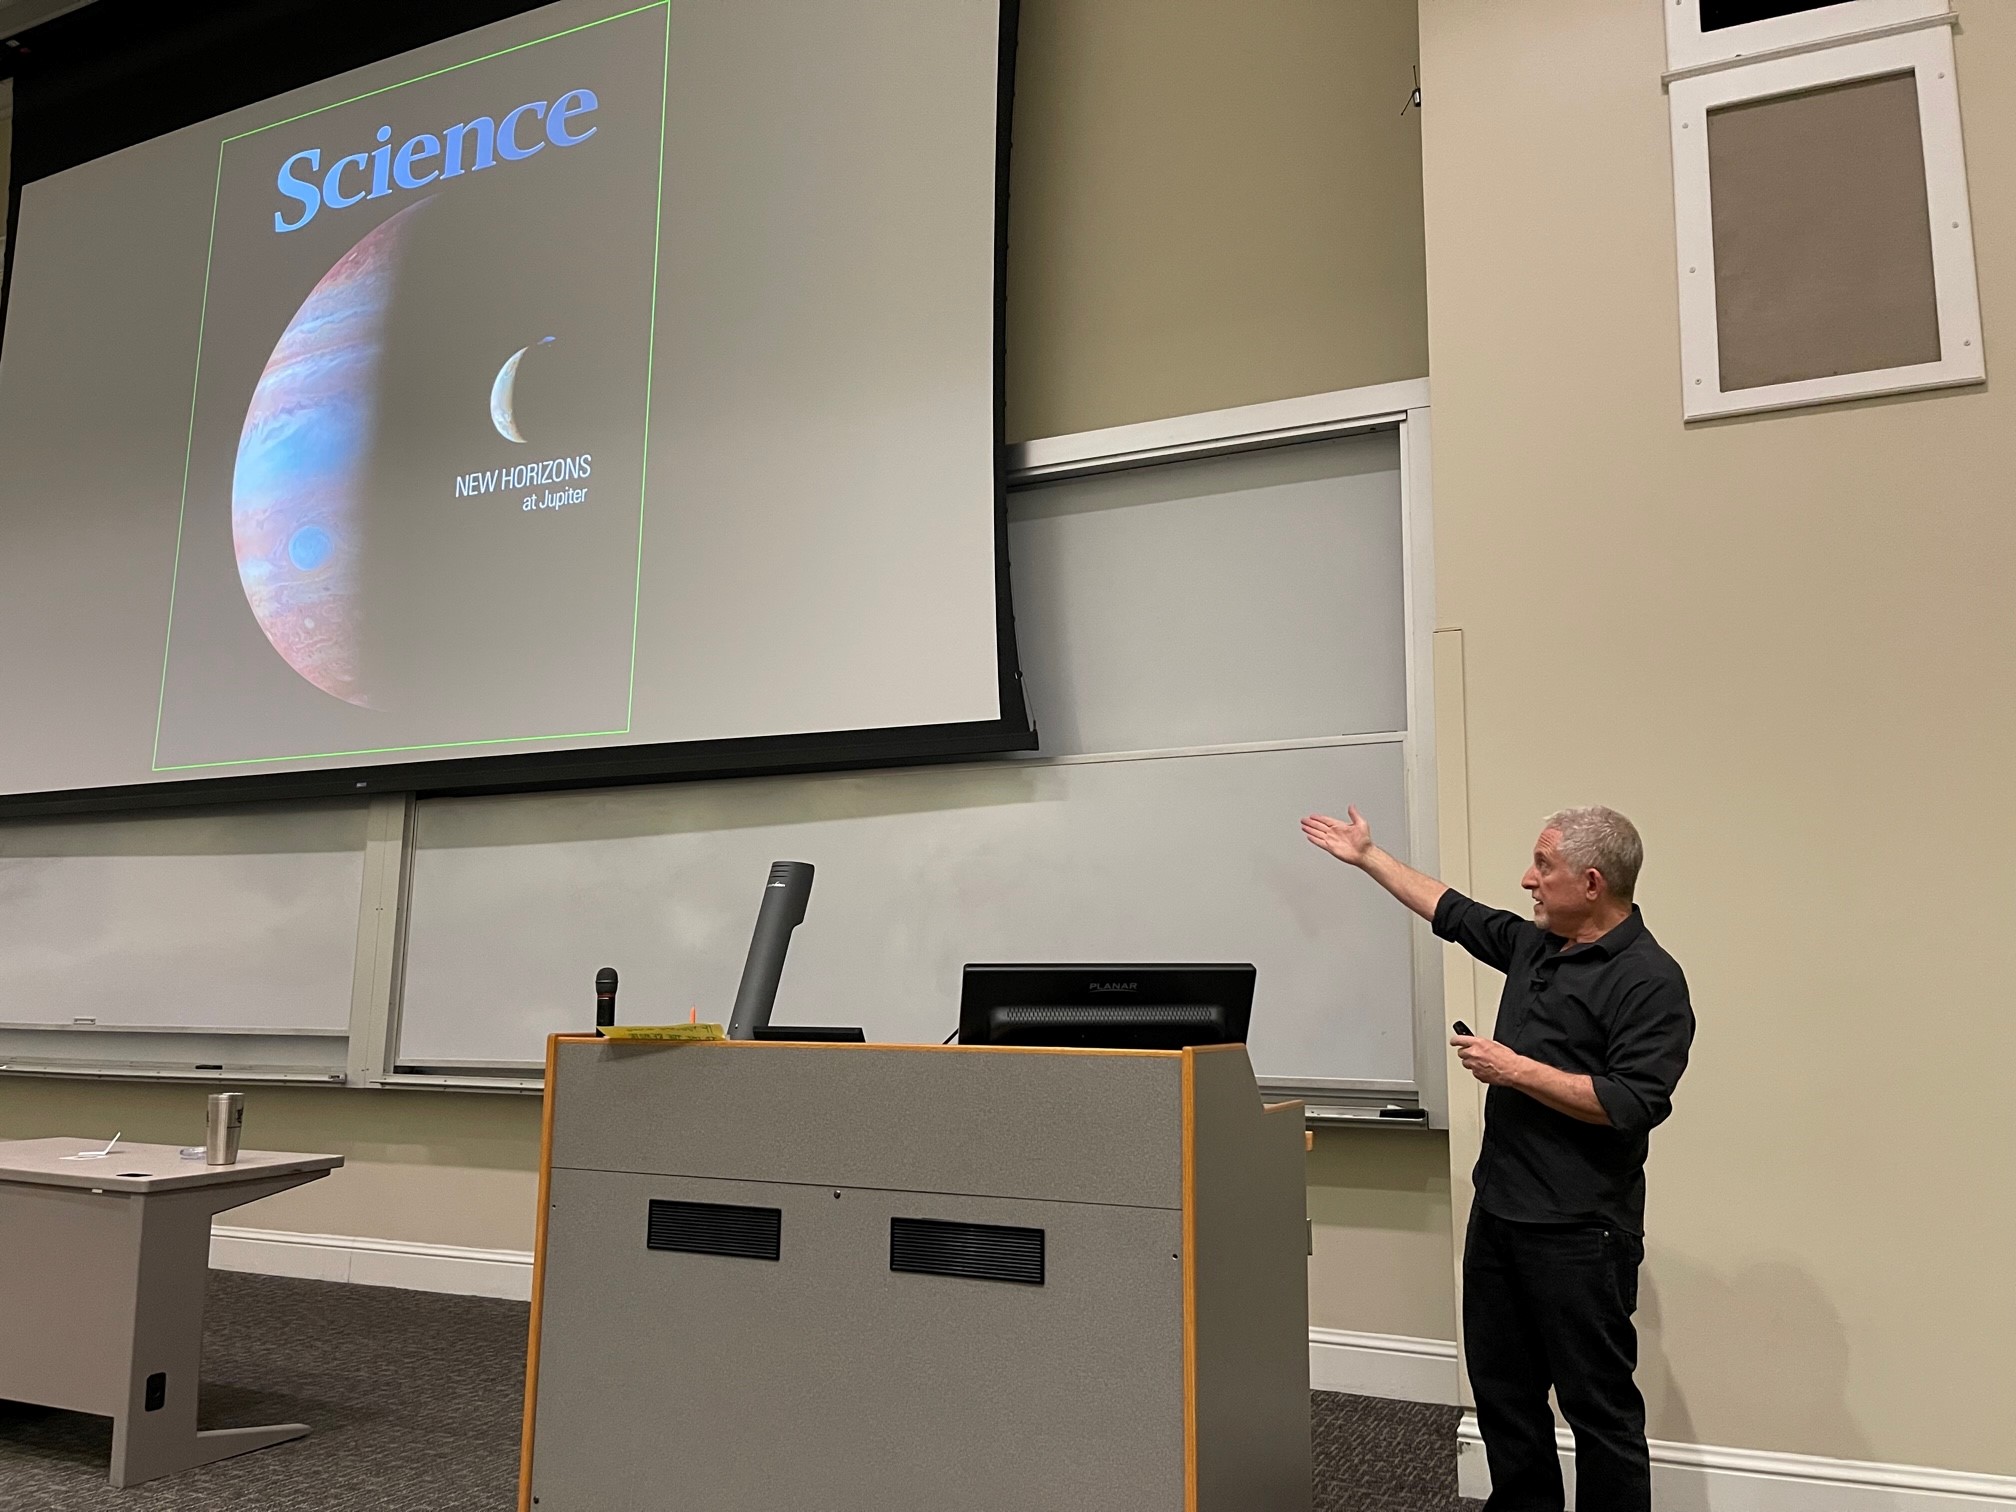 Allan Stern points to the cover of Science that showed the extraordinary image of the New Horizons mission.